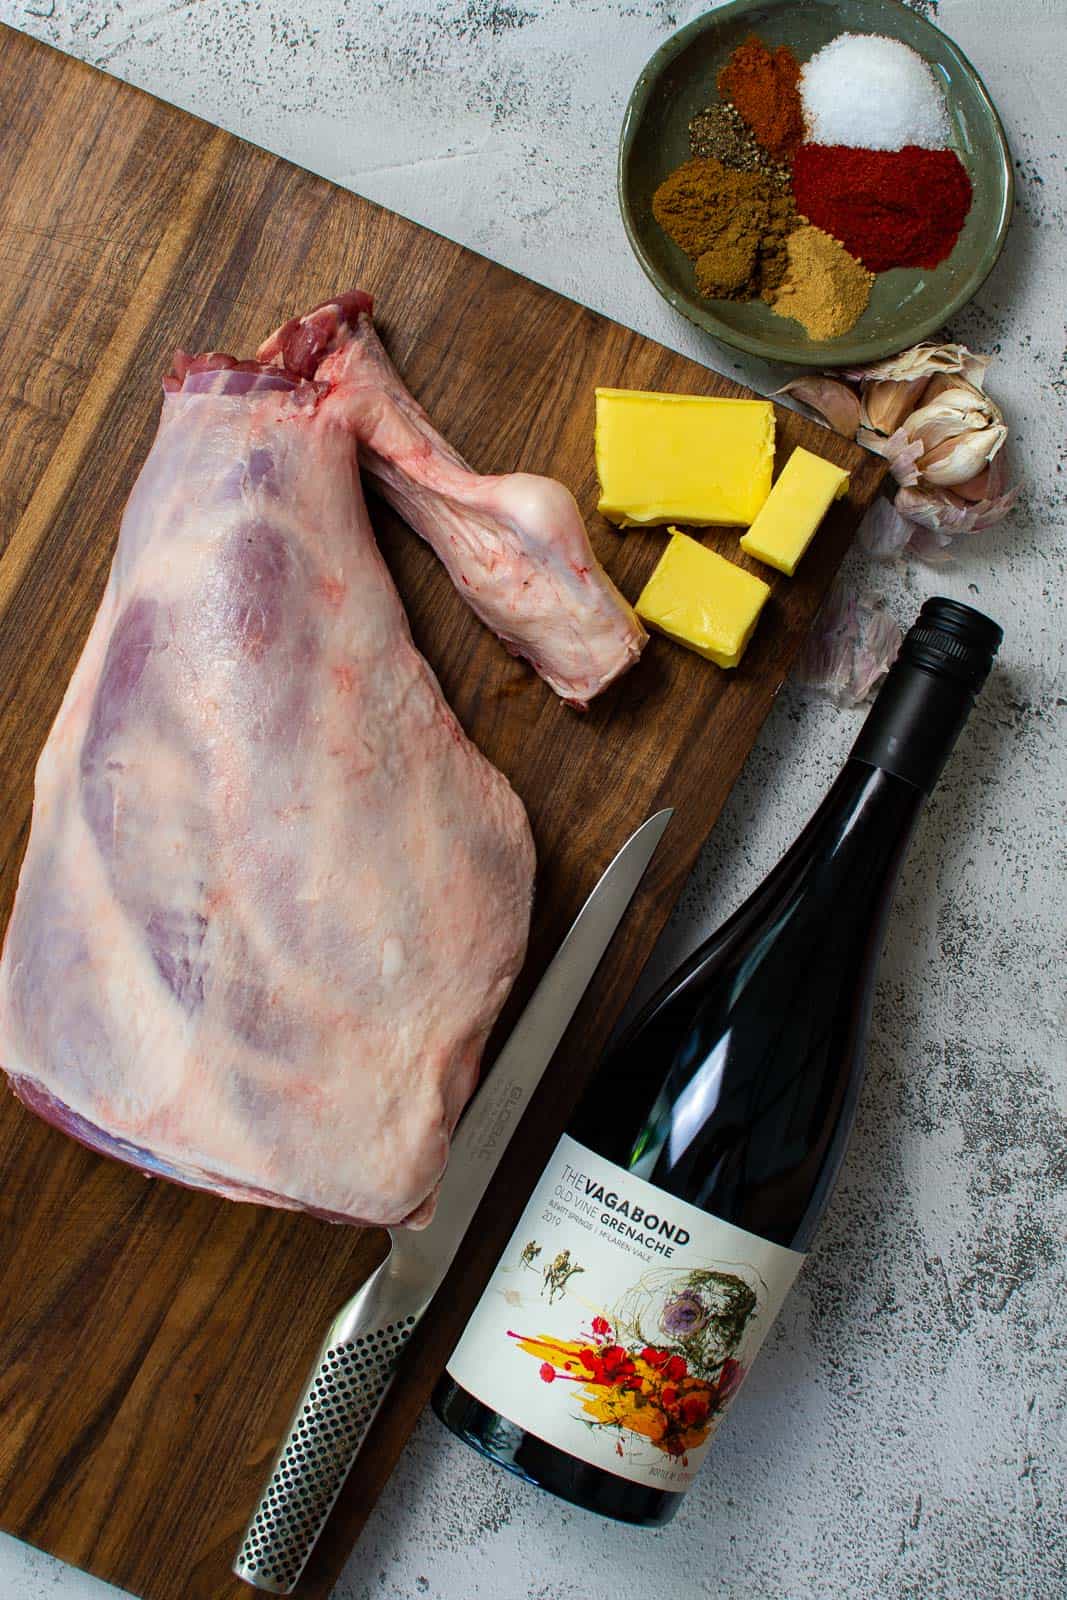 whole leg of lamb on a global chopping board with Thistledown vagabond grenache next to it